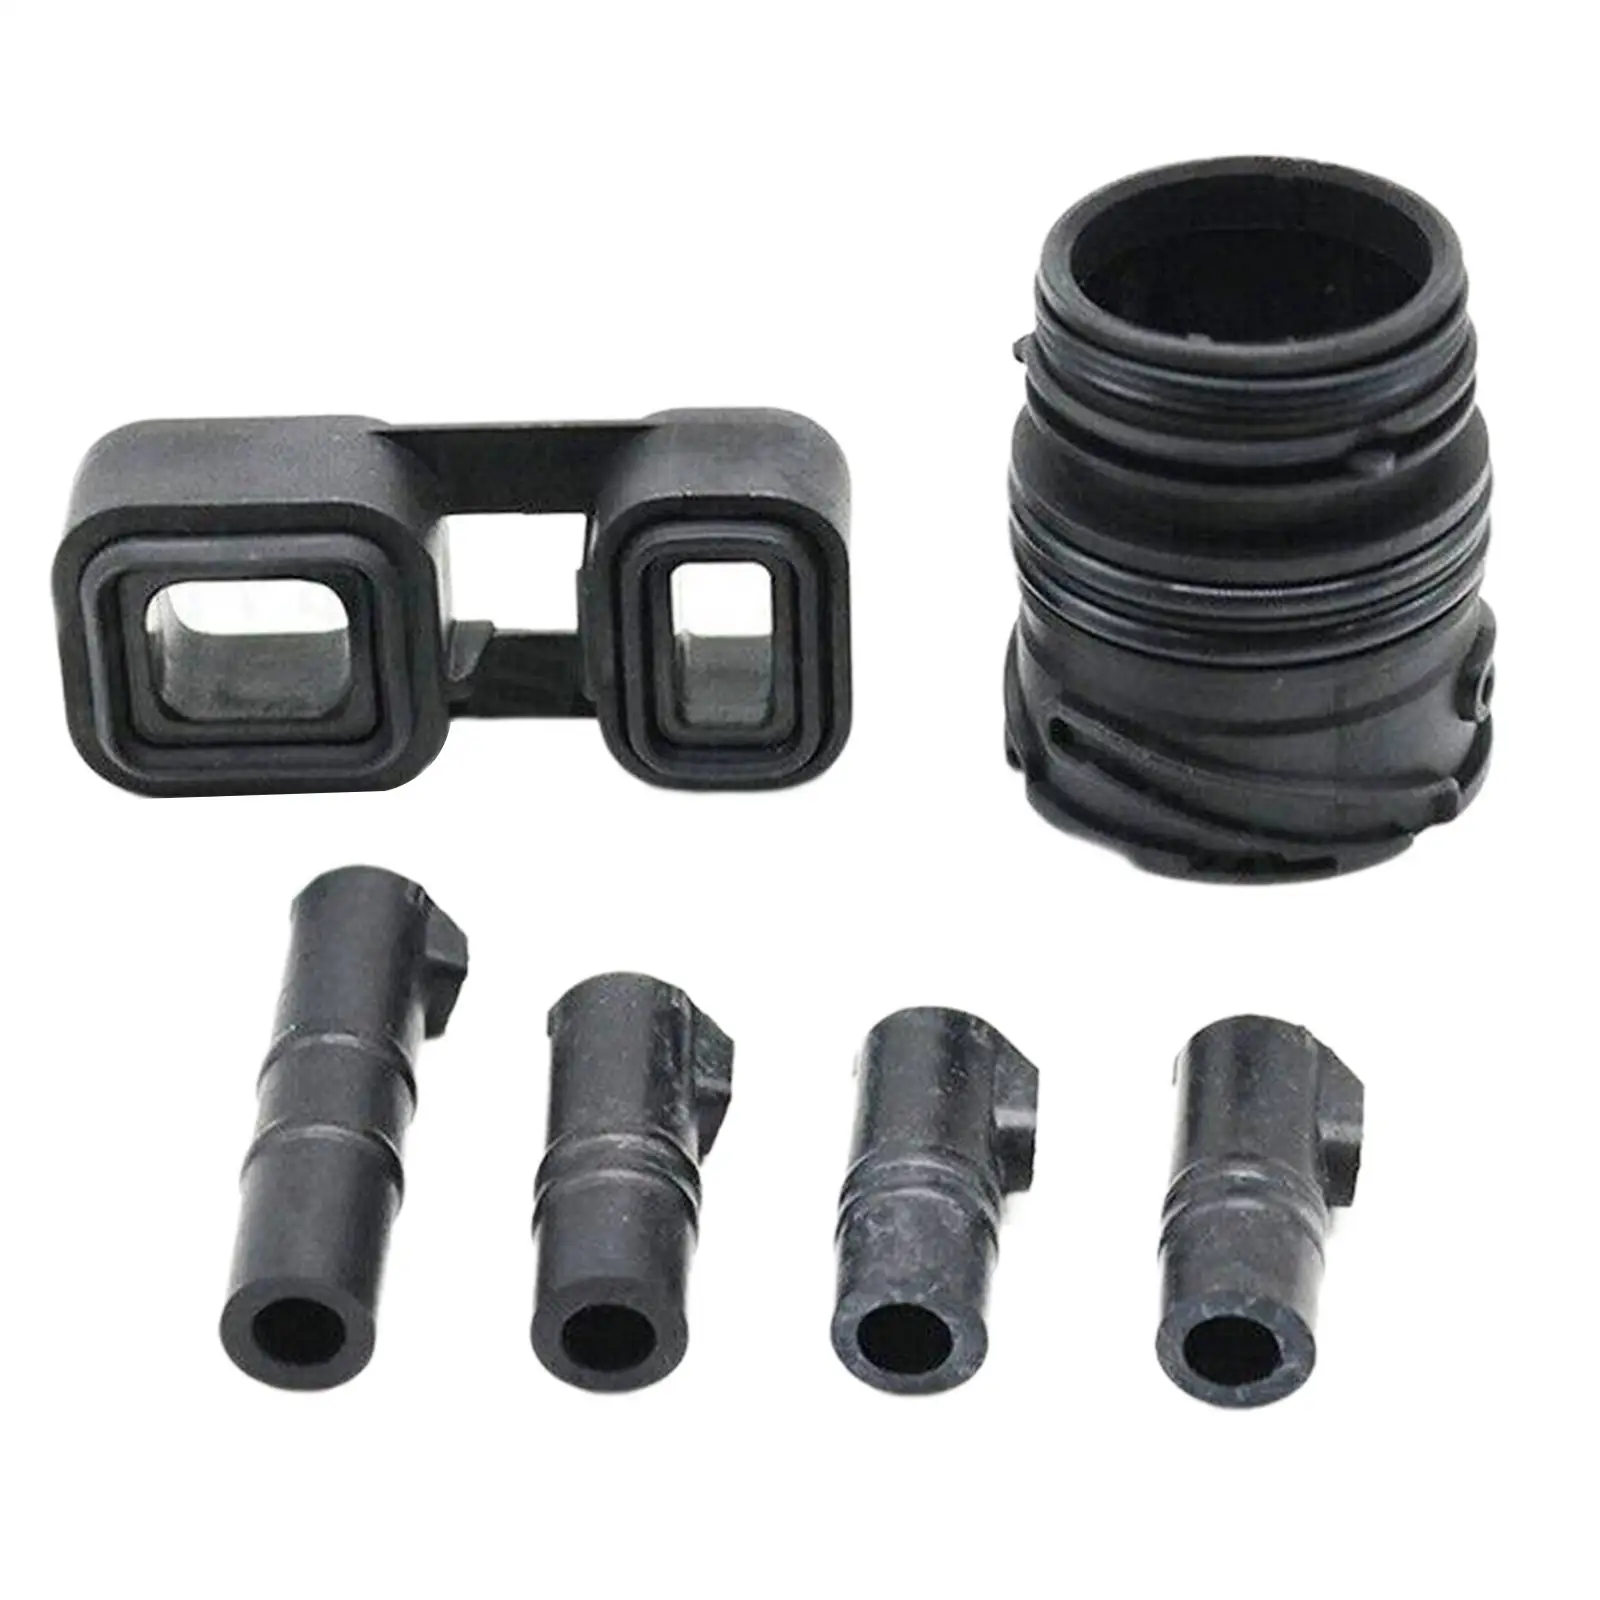 Valve Body Sleeve Connector Seal Kit Rubber for BMW 1 Series 3 Series 6HP32 x1, x3, x5, Z4, Zf Models with 6 Speed Zf 6HP26